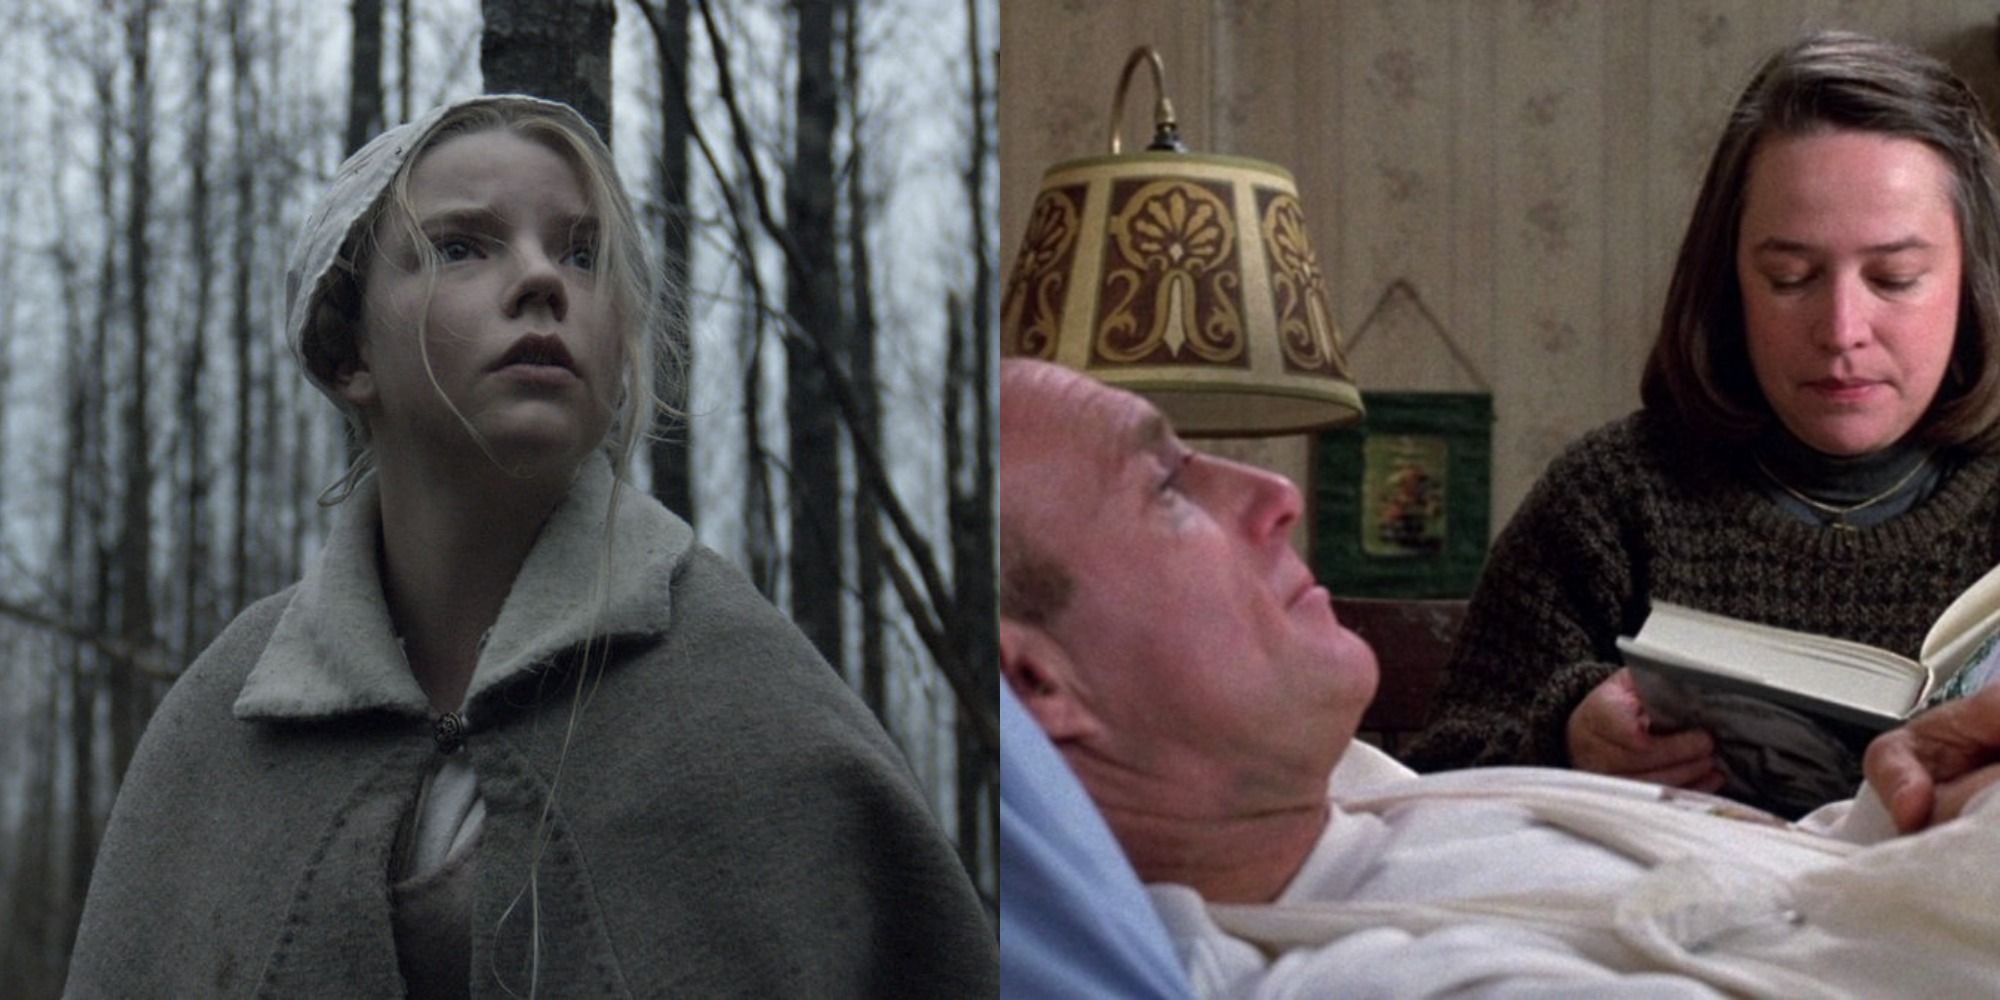 Annie and Paul from Misery and Thomasin from The Witch in two side by side images.